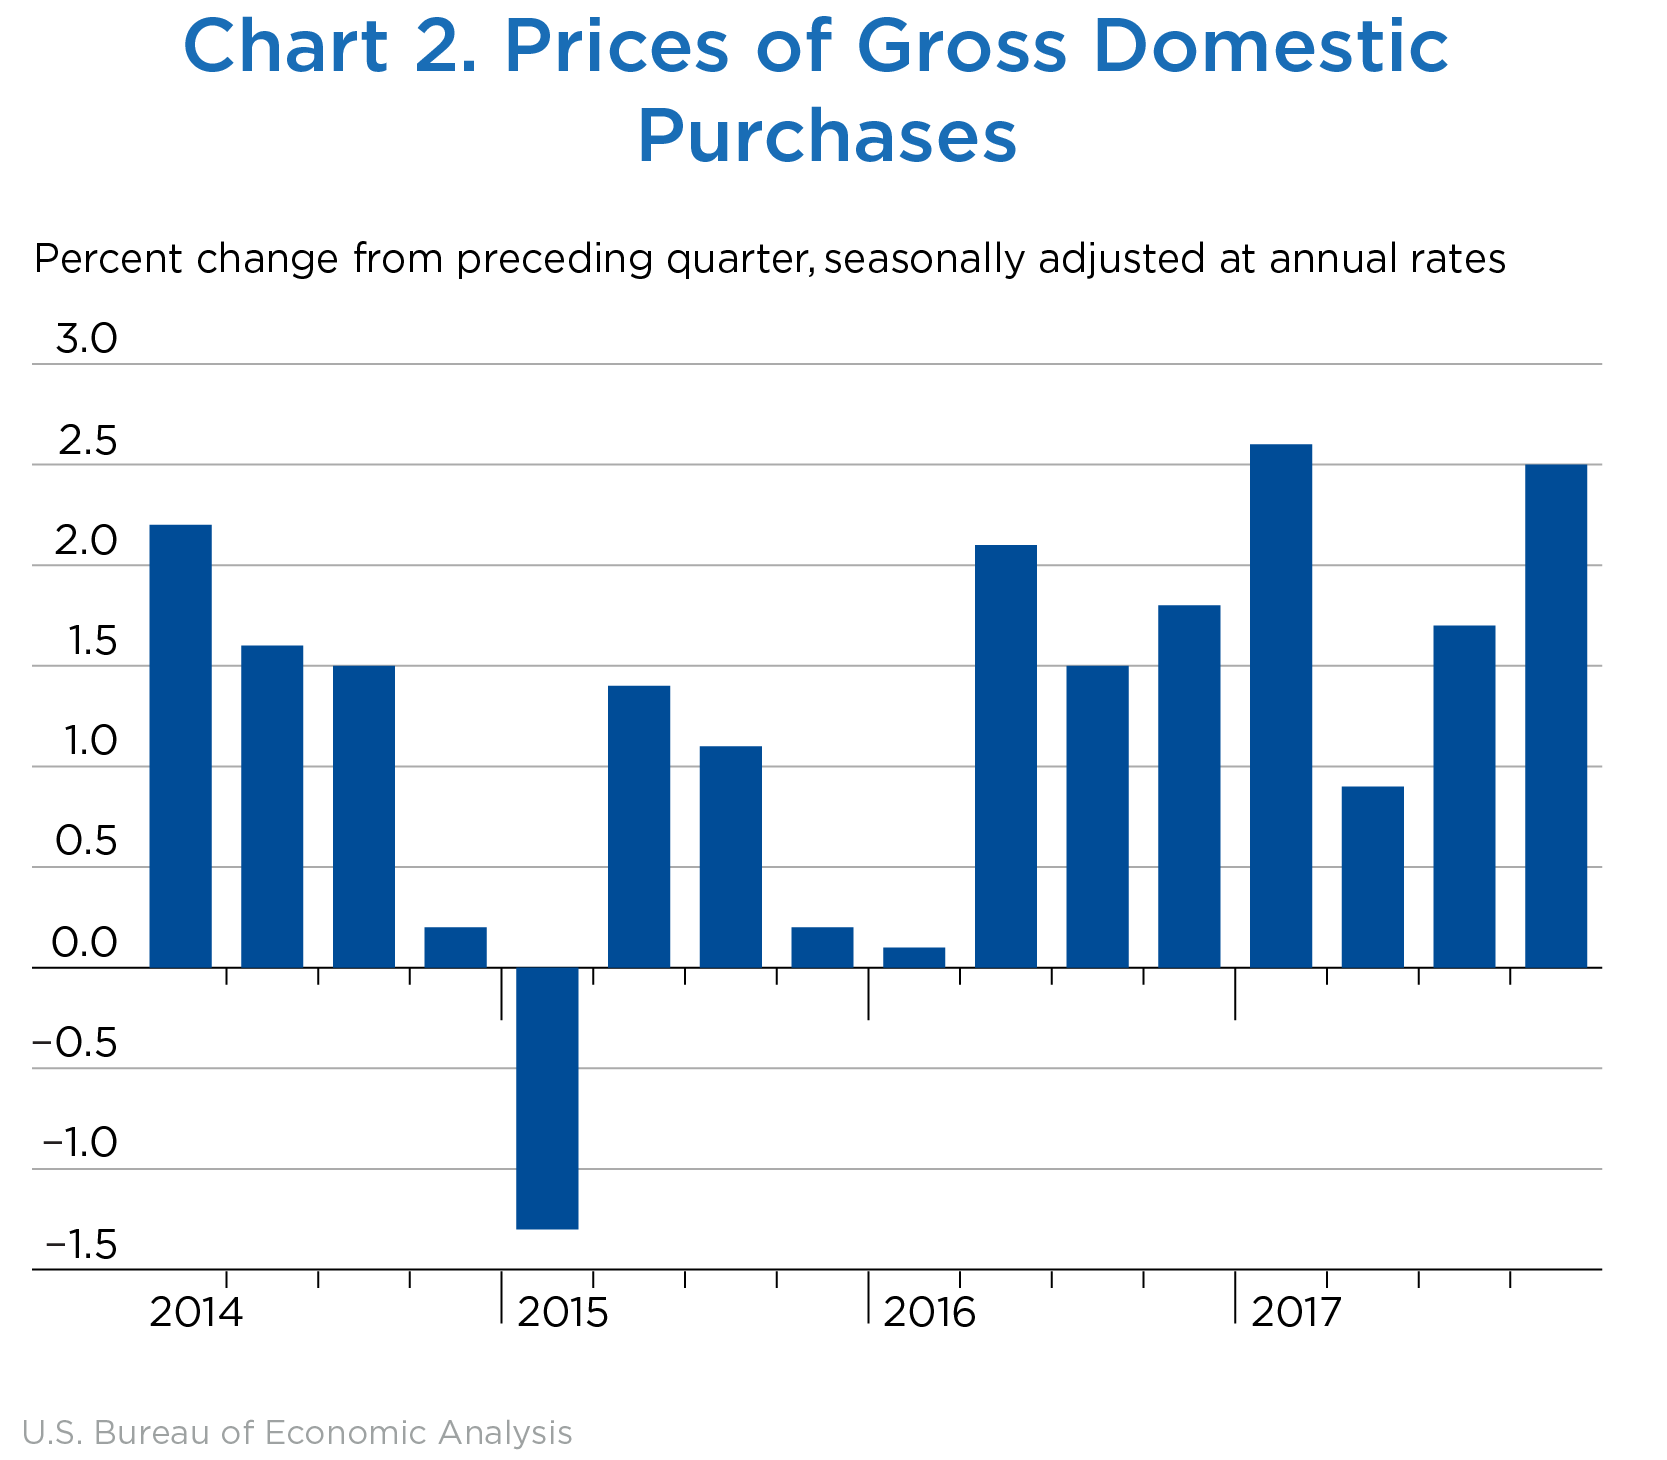 Chart 2. Prices of Gross Domestic Purchases, Bar Chart